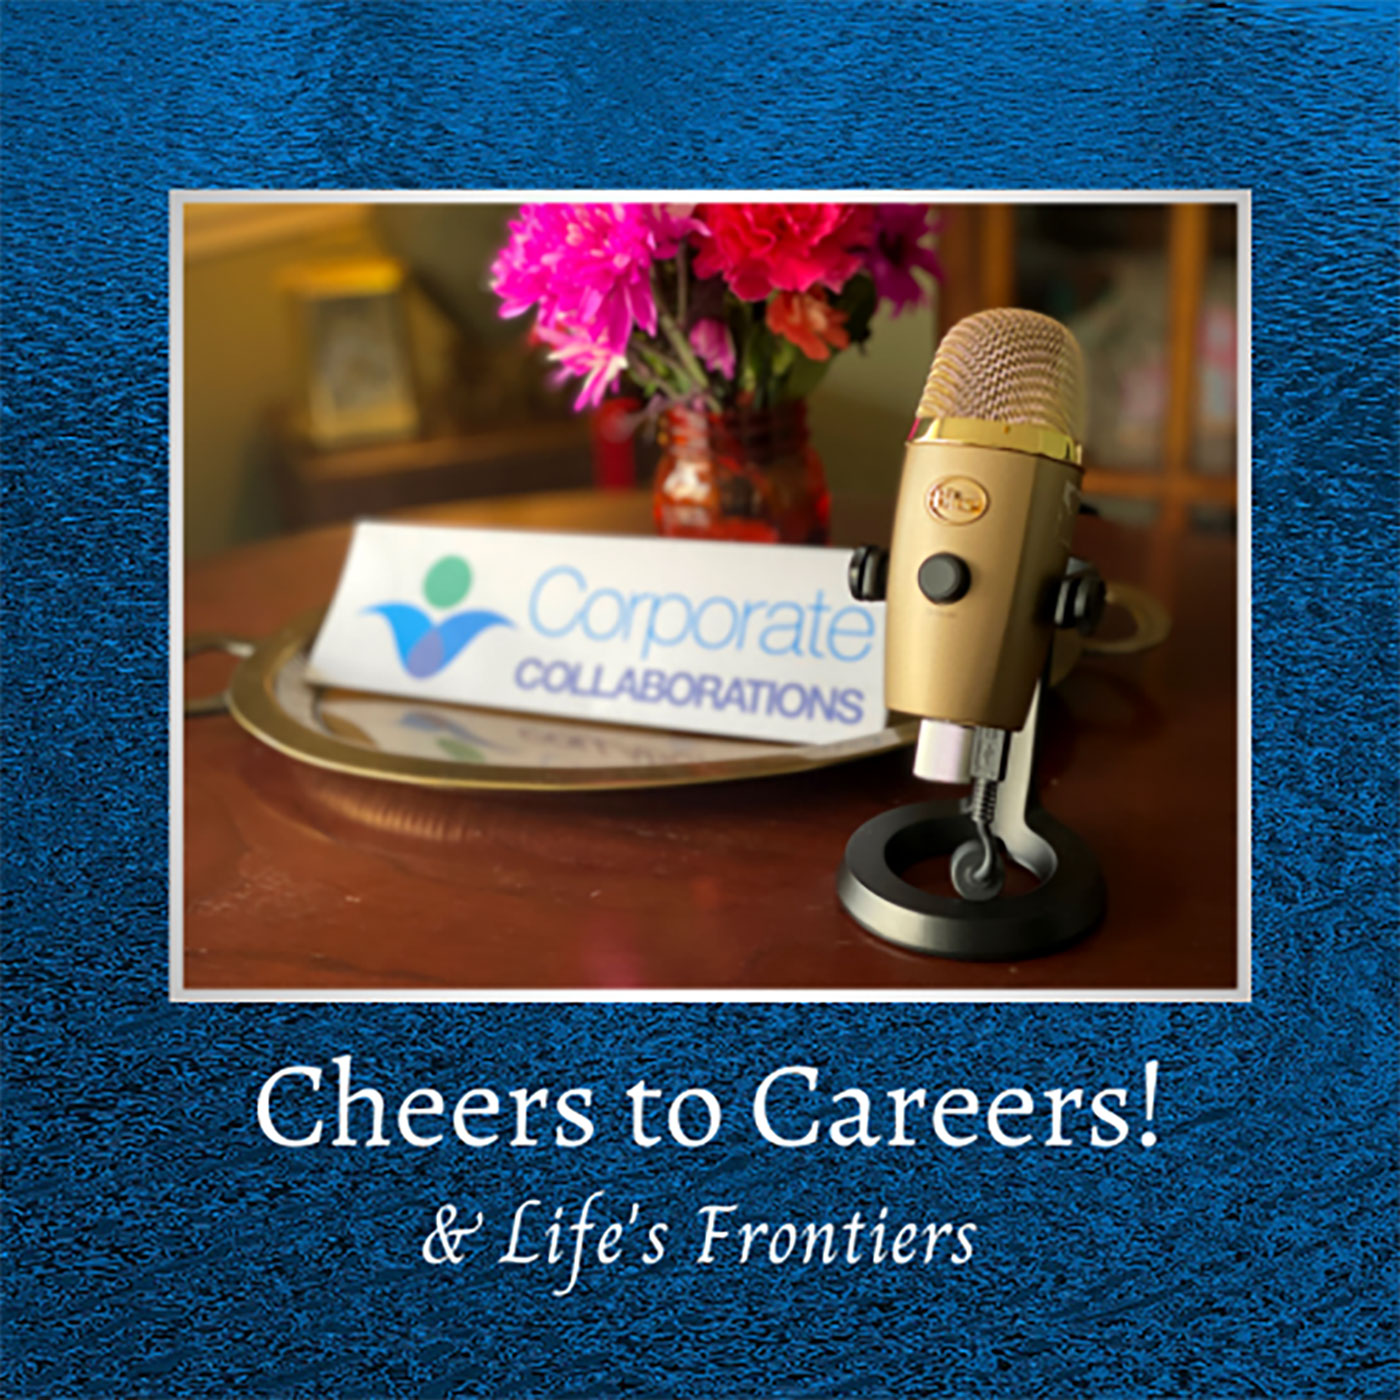 Episode 1: Welcome to Cheers to Careers